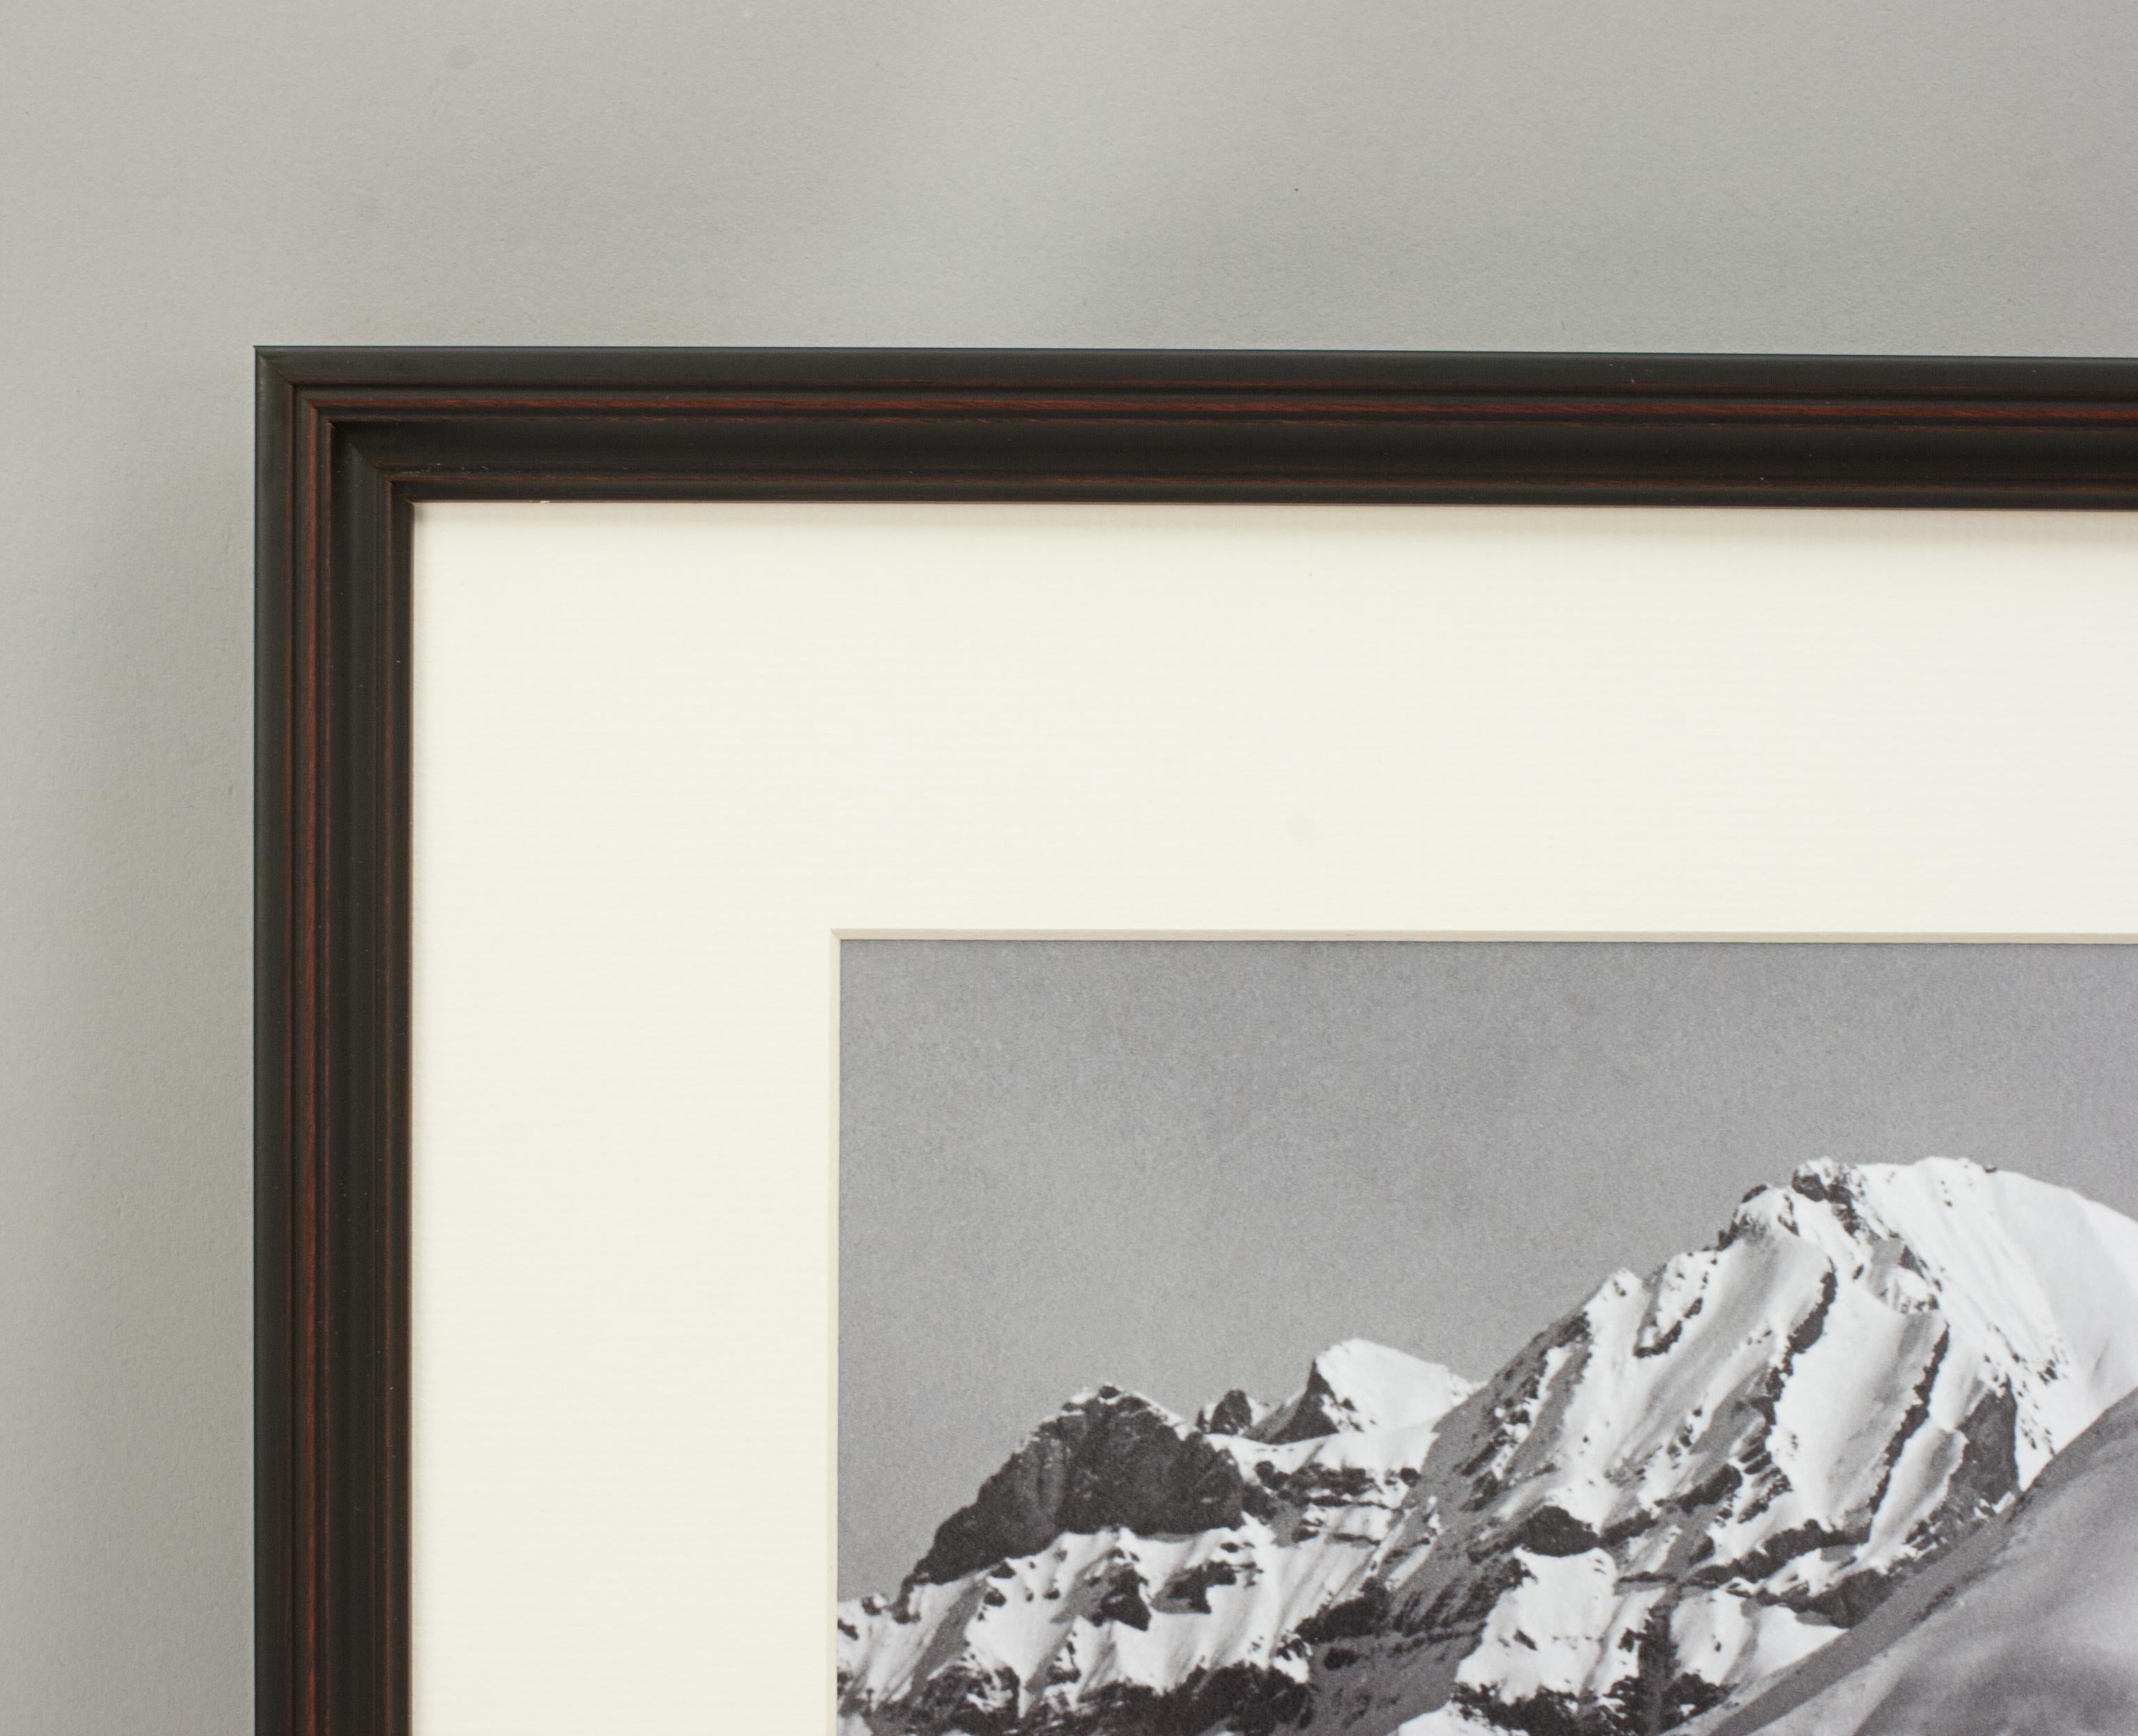 Paper Alpine Ski Photograph, 'Panoramic View', Taken from Original 1930s Photograph For Sale